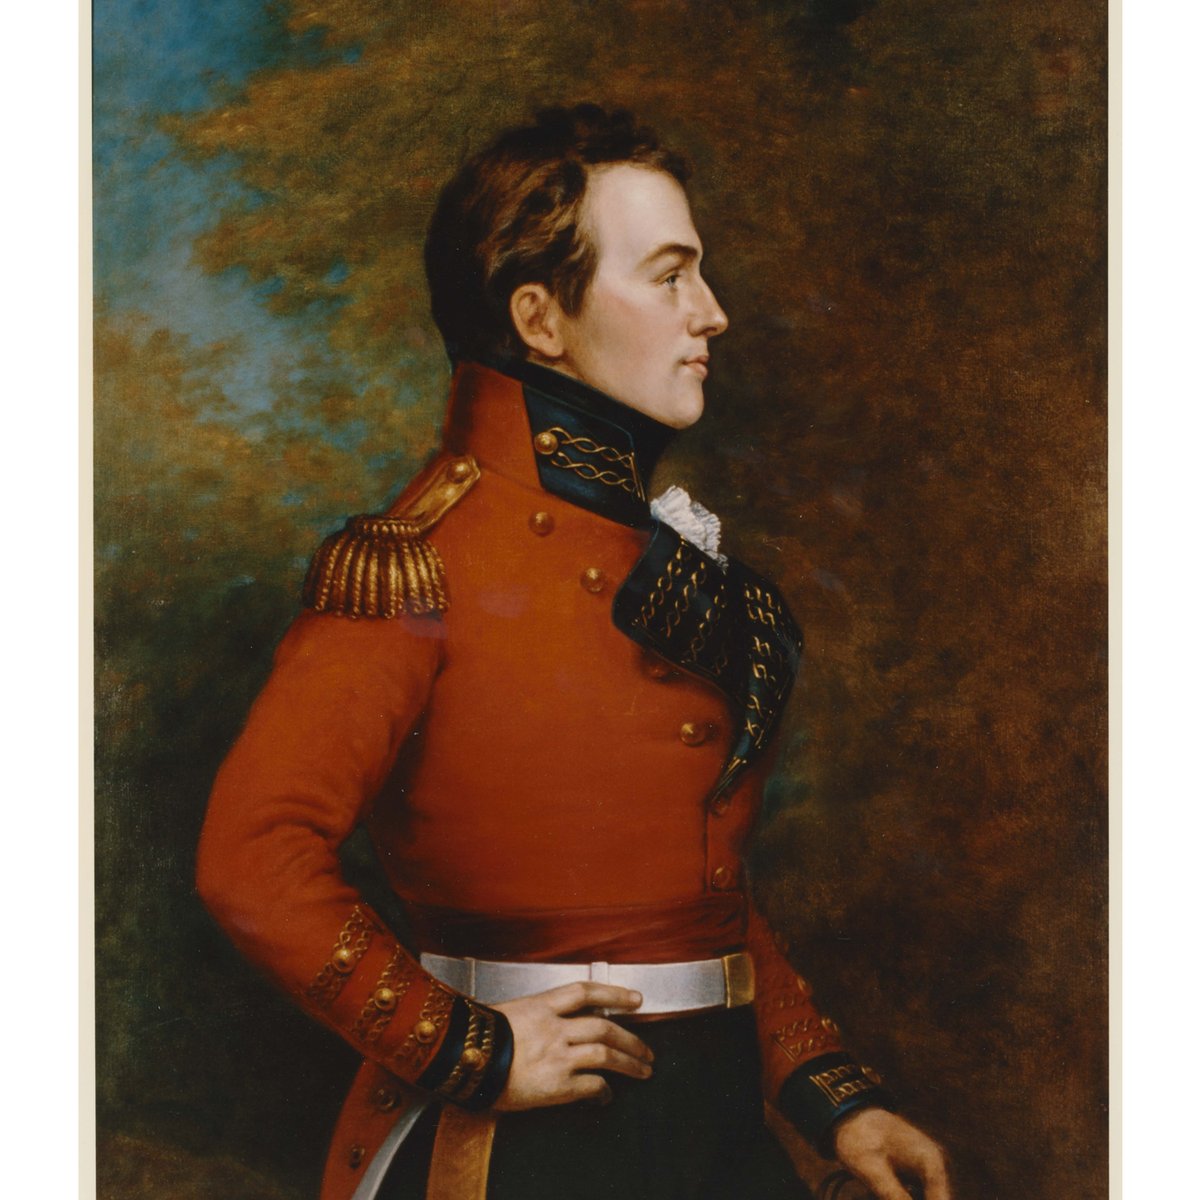 Major General Sir Isaac Brock, KB.  During the War of 1812, Brock was instrumental in thwarting the abortive U.S. invasion of Canada, earning the nickname, 'Hero of Upper Canada,' where he is still revered to this day.
#britishhistory #BritishEmpire #britisharmy #canadianhistory